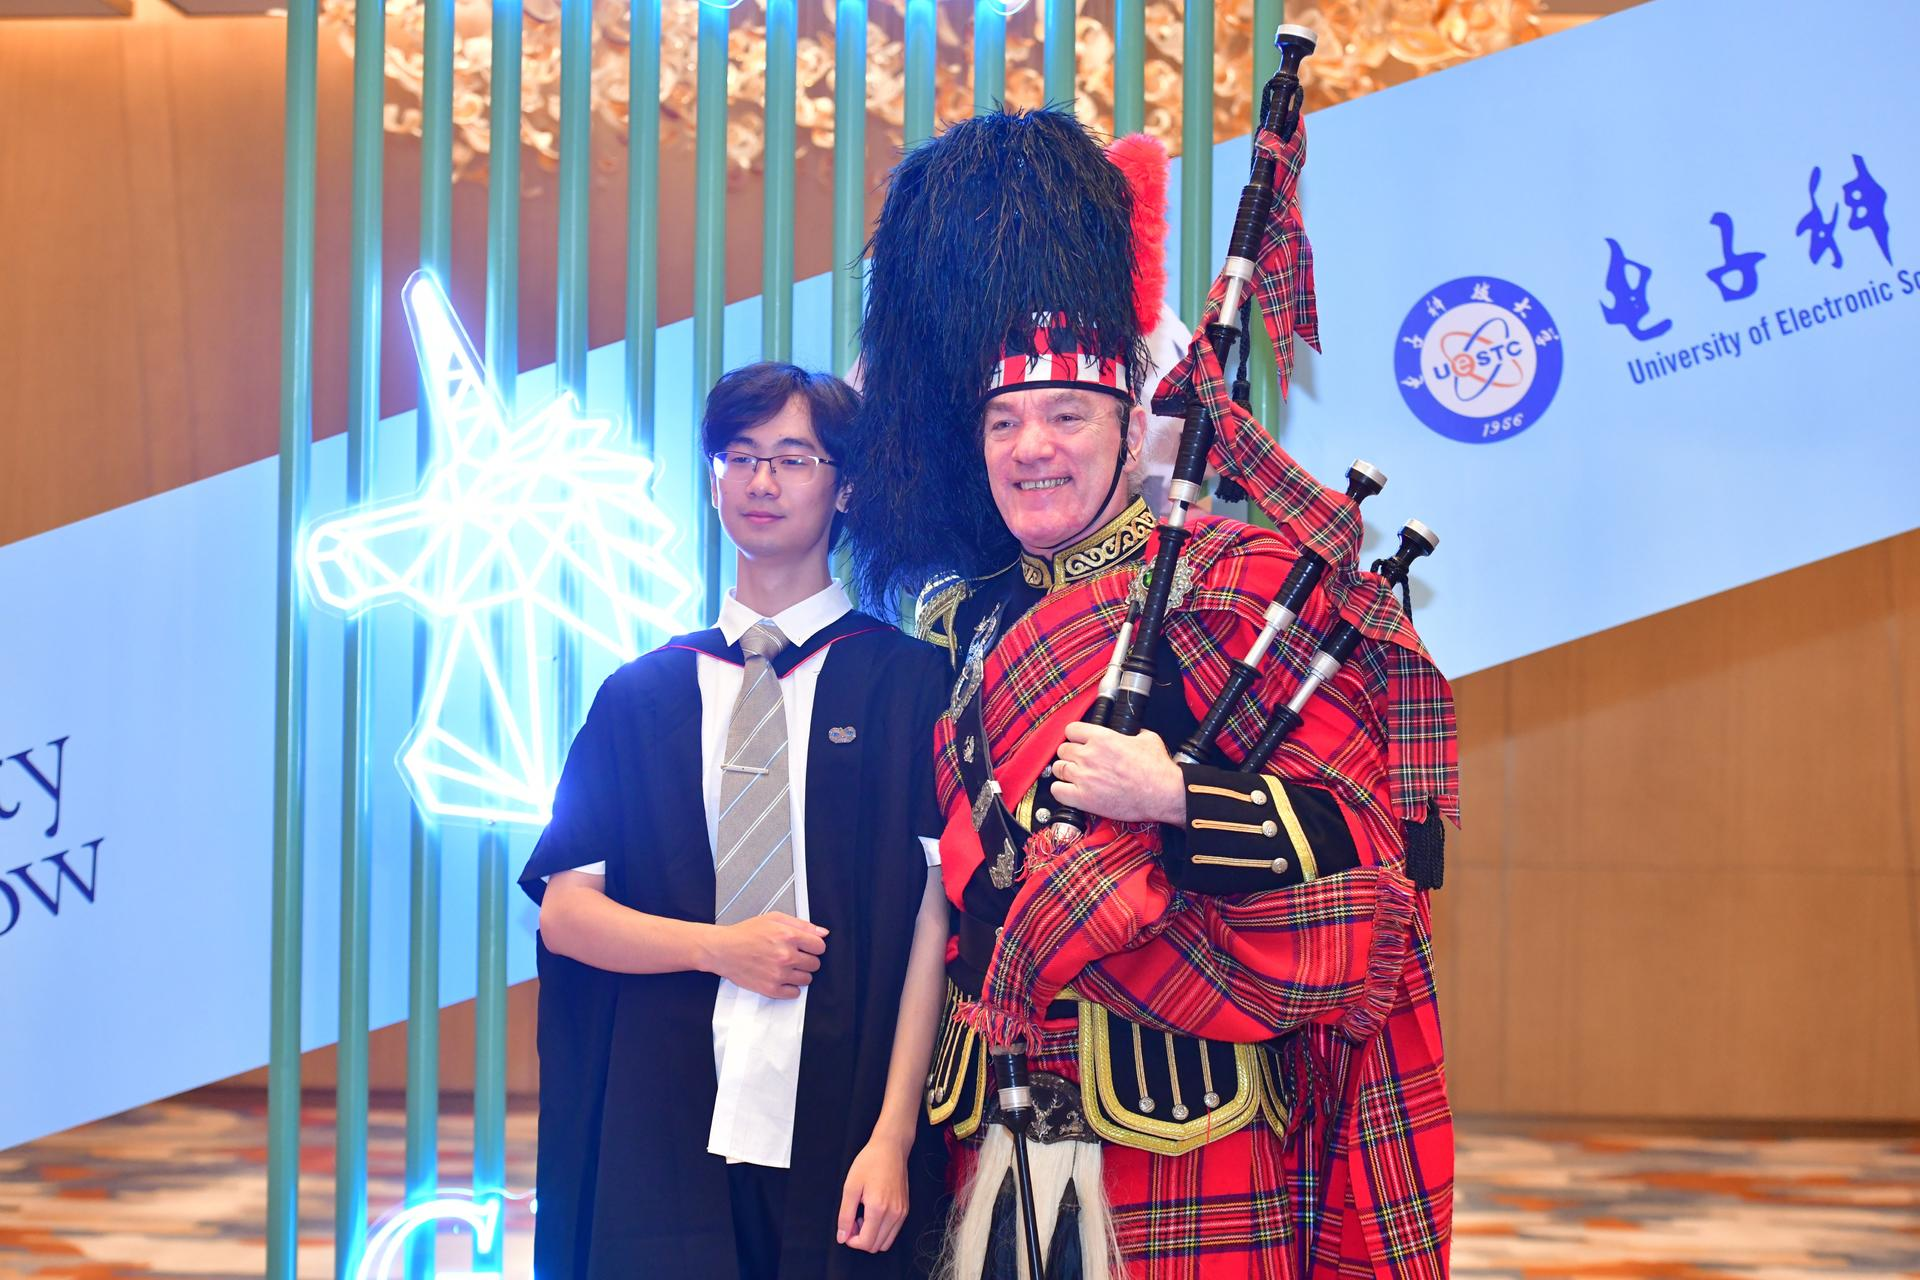 Bagpiper with student at Chengdu graduation